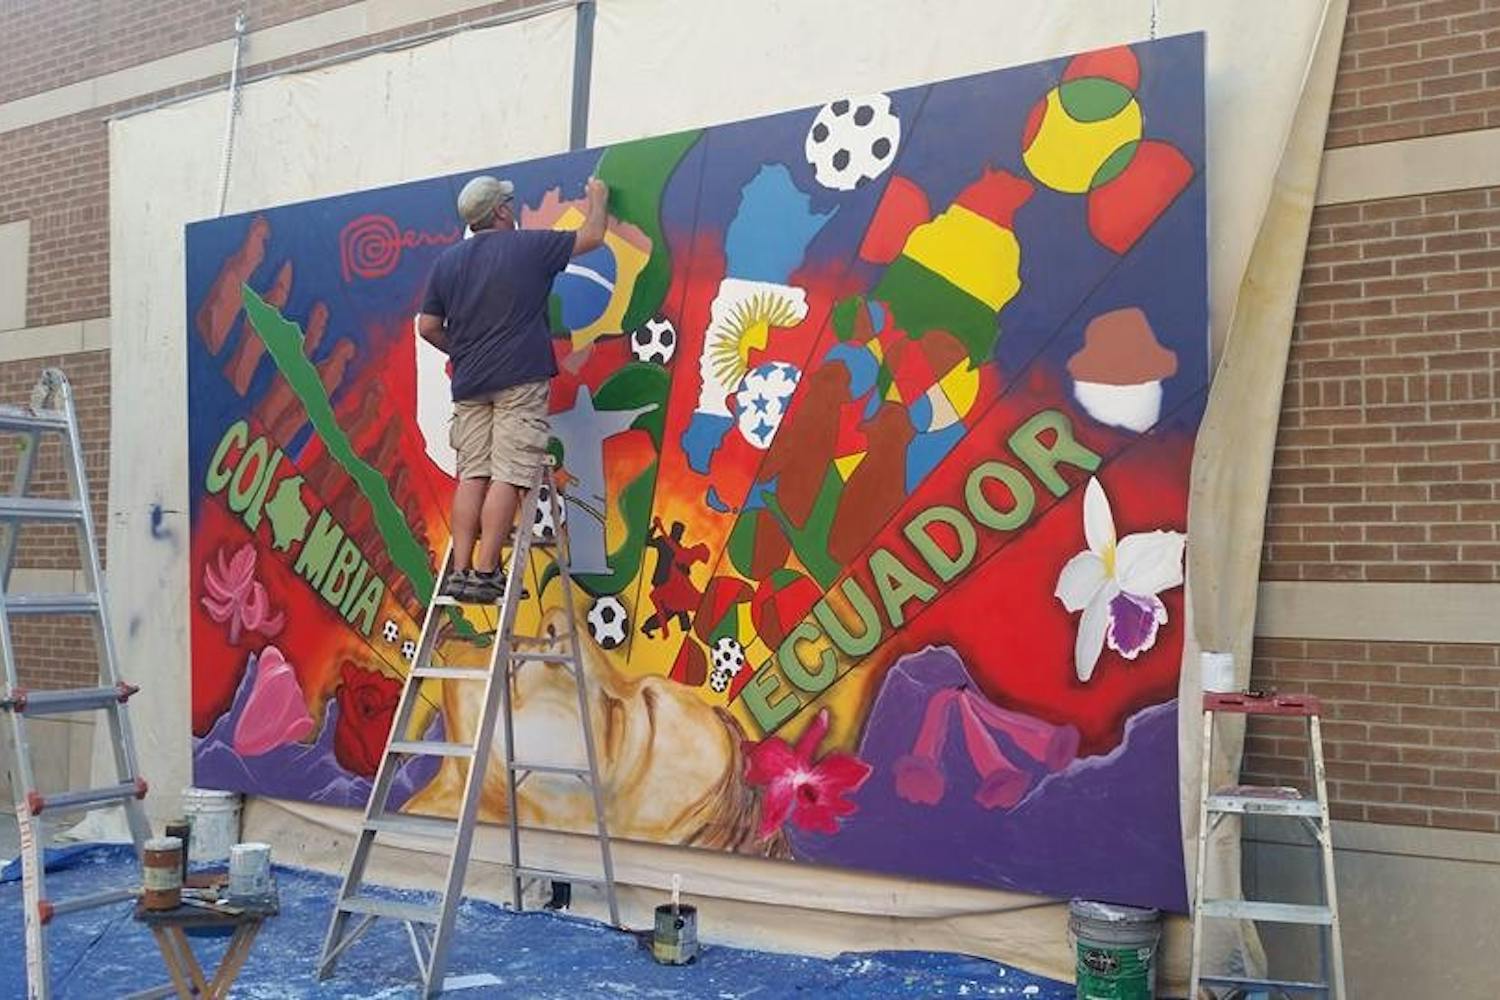 Local artist Hugo Medina&nbsp;works on the mural he designed for last year's&nbsp;Hispanic Heritage Month on Oct. 2, 2015. The mural is hanging on the West campus for this year's celebration as well.